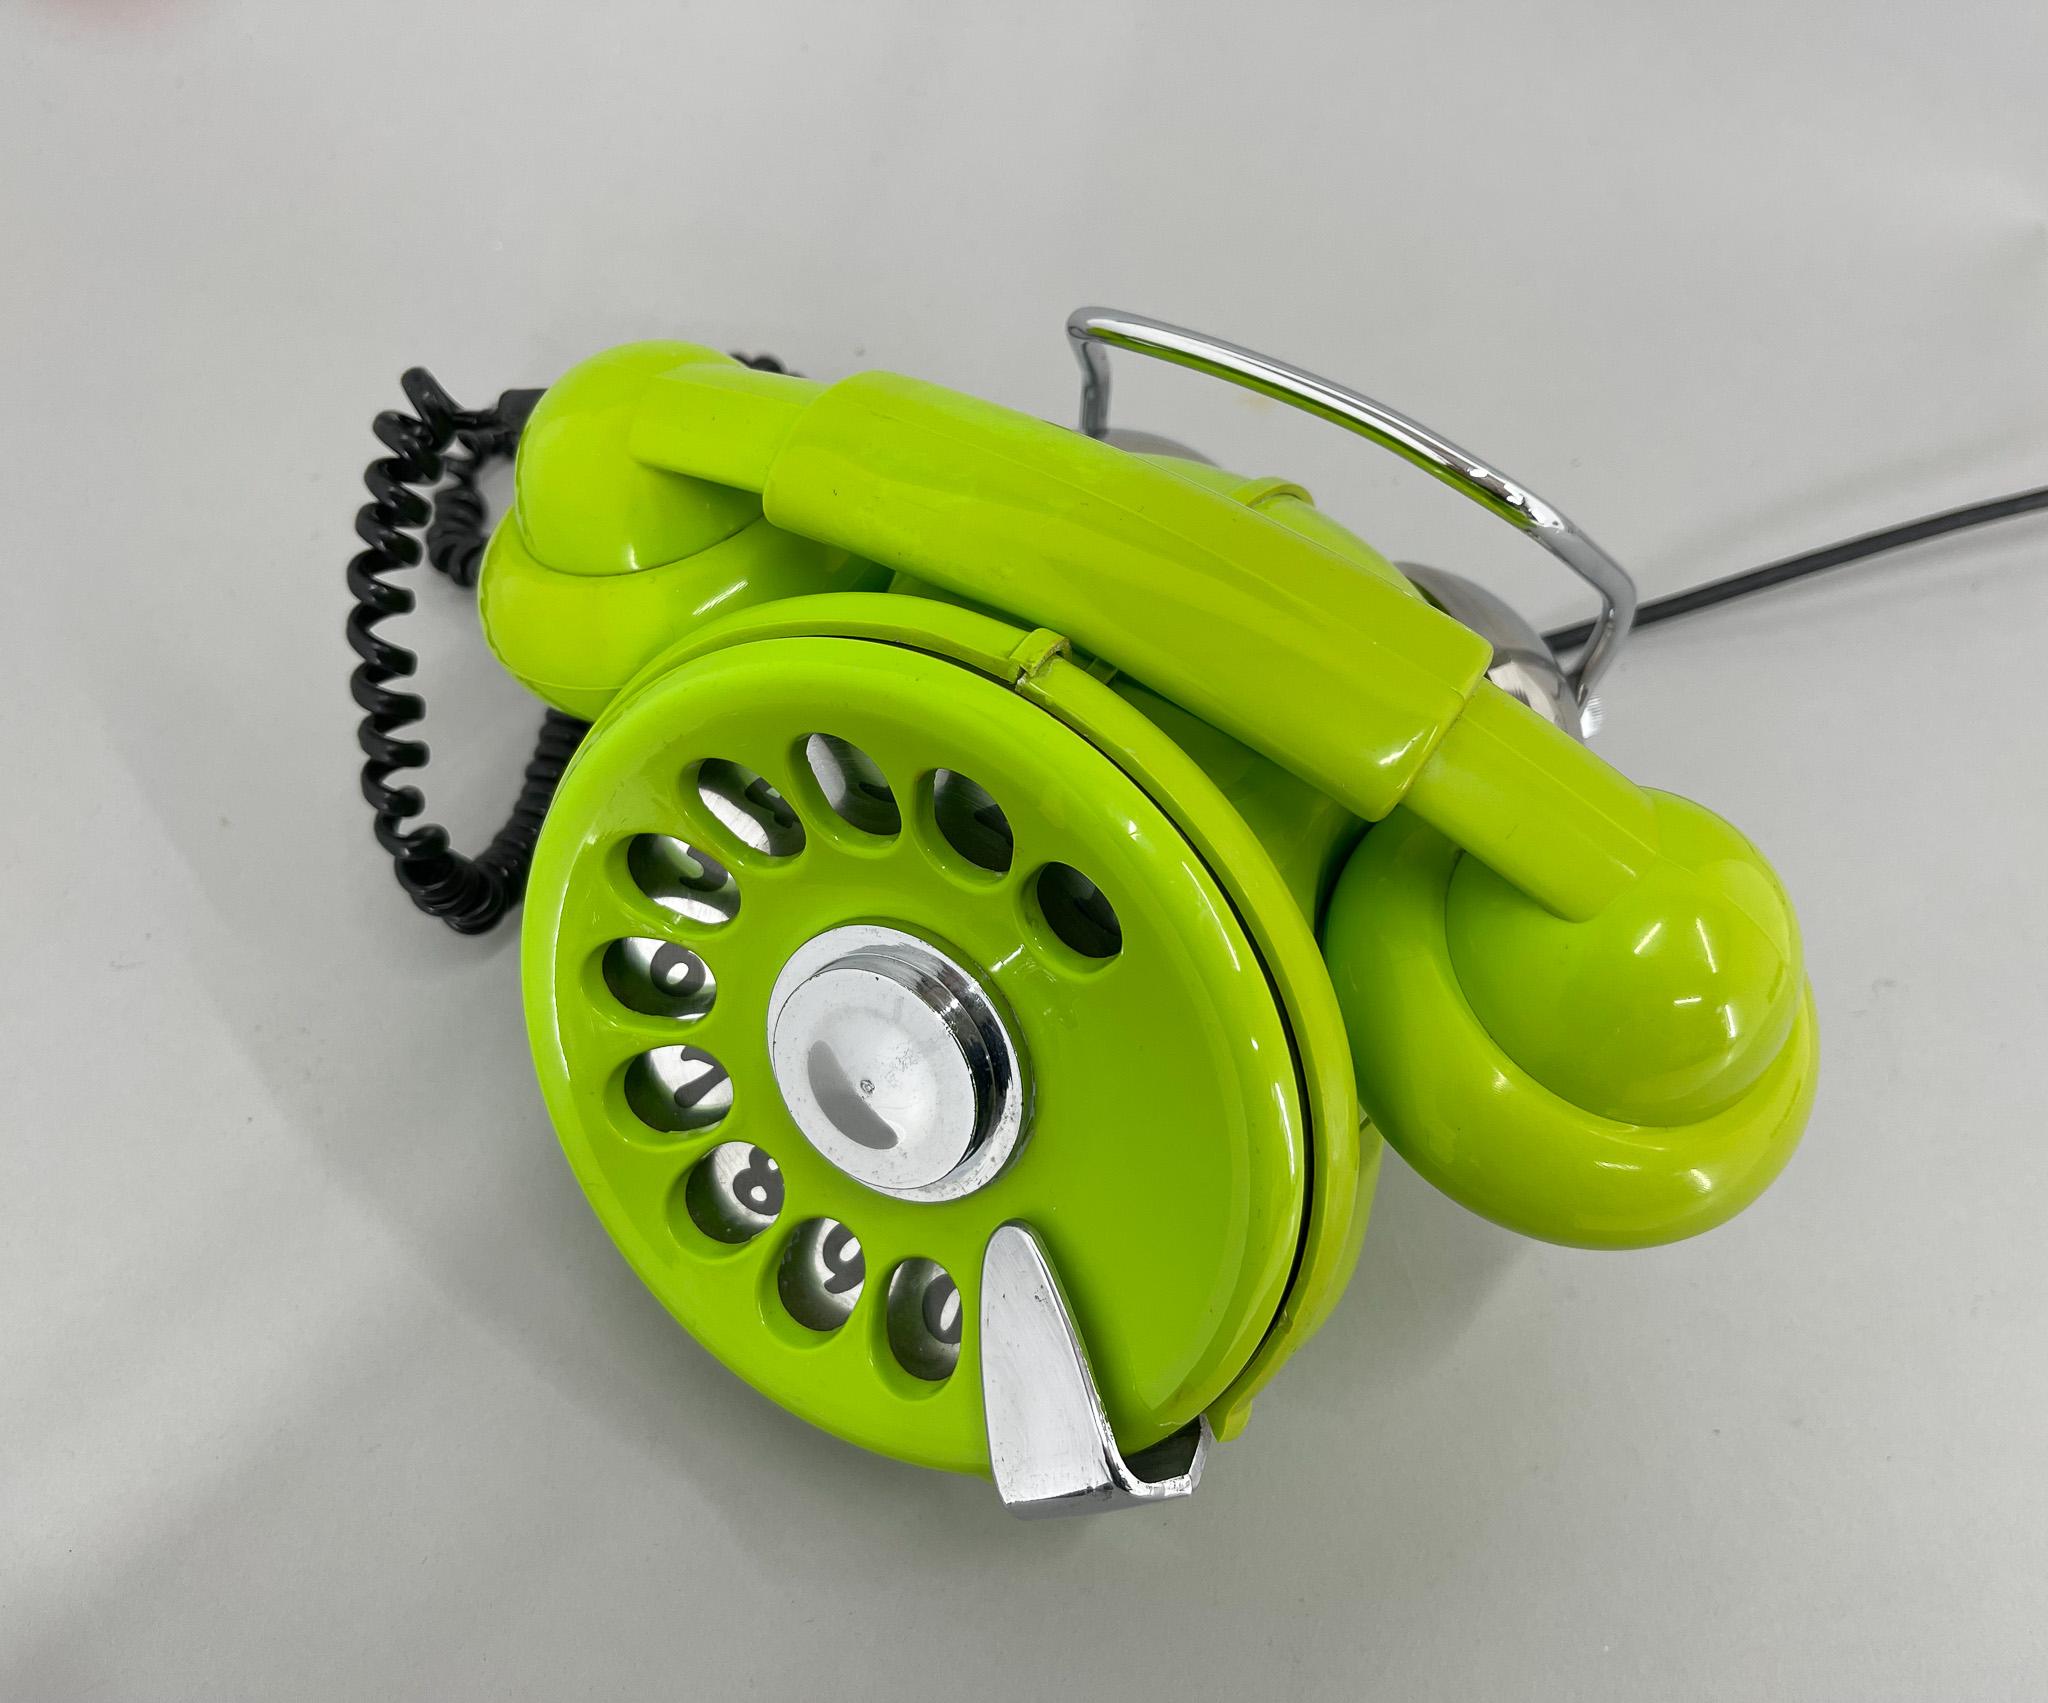 Unique model of dial plastic phone by Sergio Todeschini, made in Italy in the 1970's.